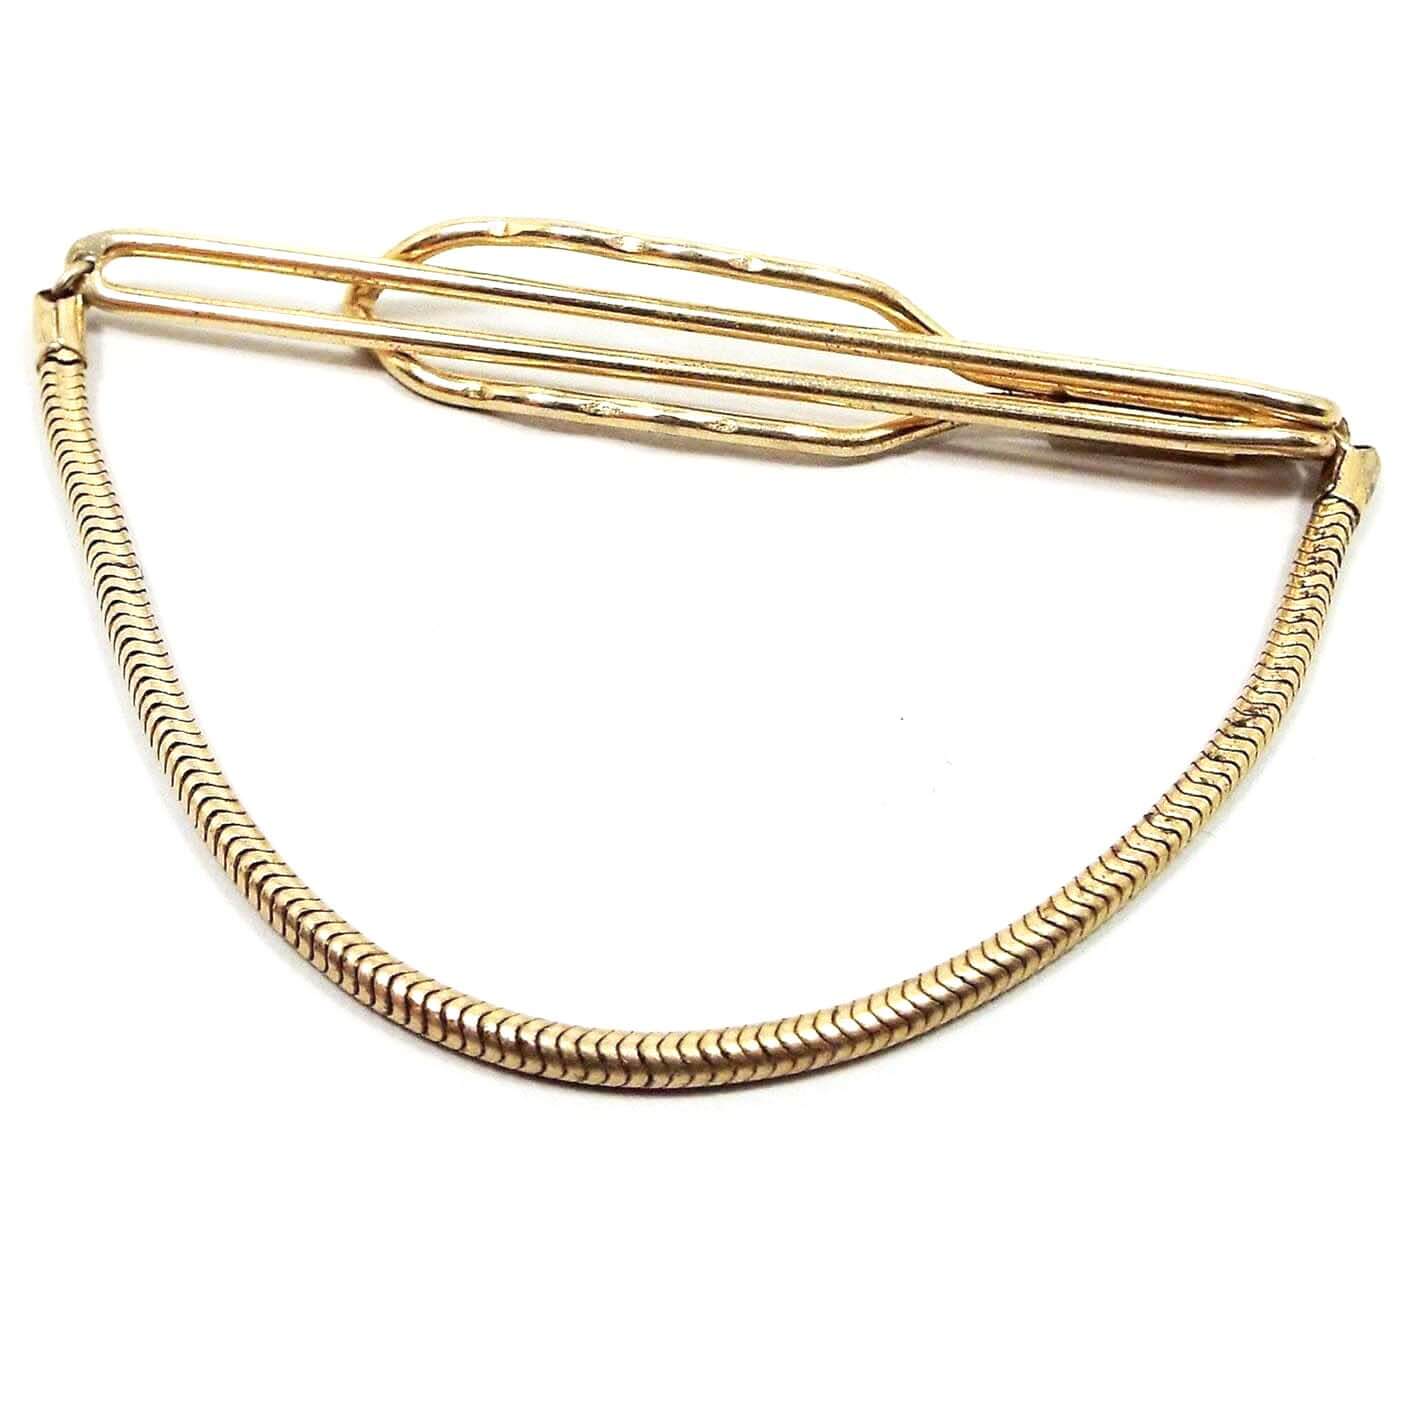 Front view of the Mid Century 1940's vintage Anson tie chain. It is gold tone in color. There is a long open oval bar on the front and a larger but shorter open oval bar on the back to slide the tie in between. There is a round snake link chain at the bottom. 